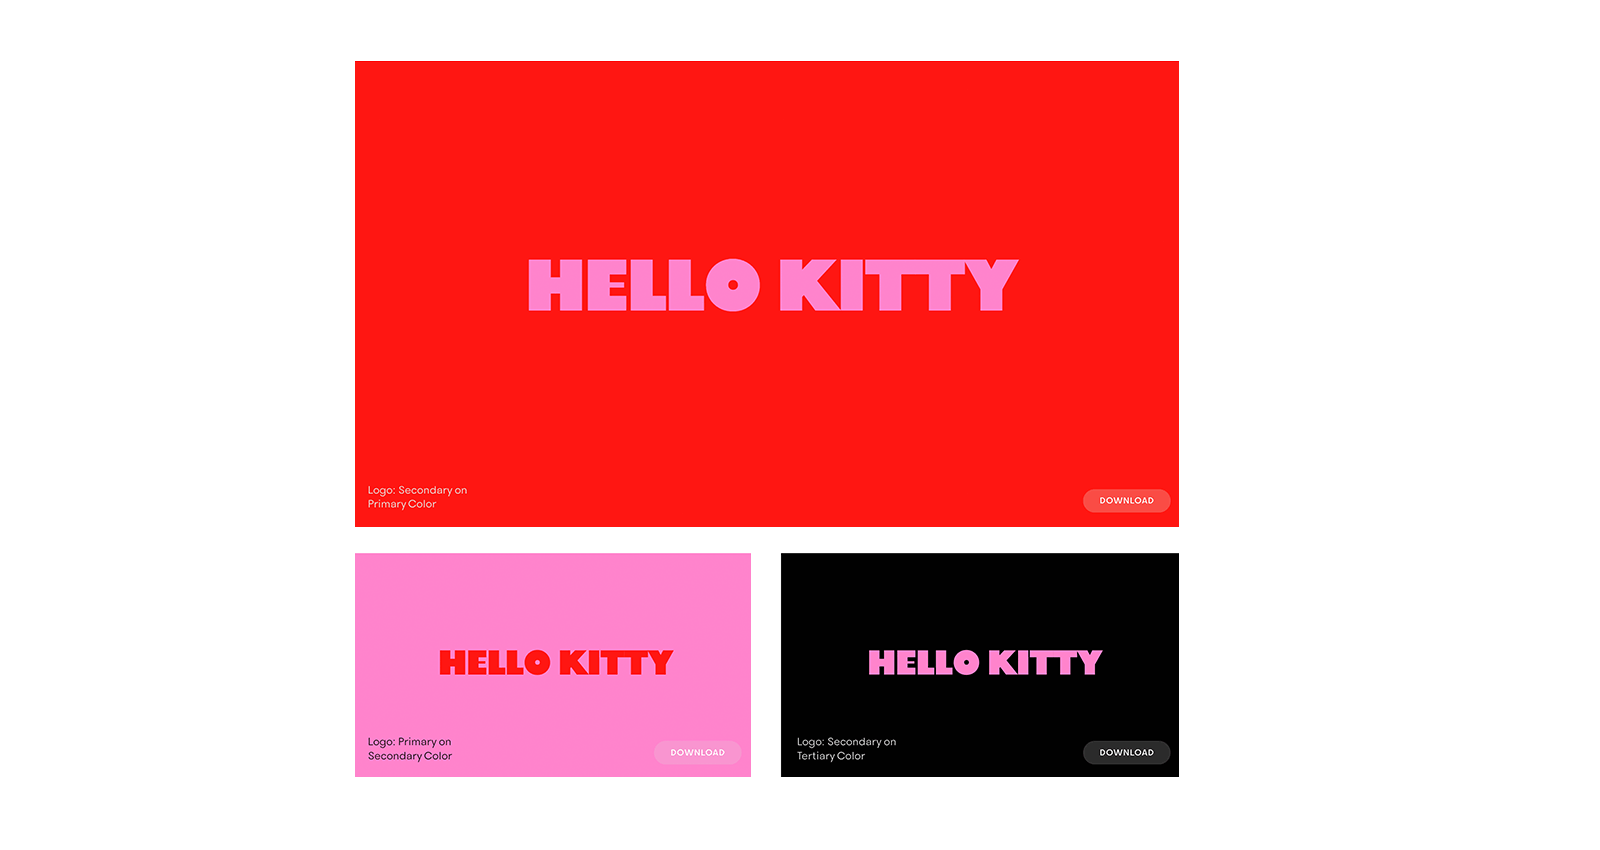 wordmark style in hello kitty colors